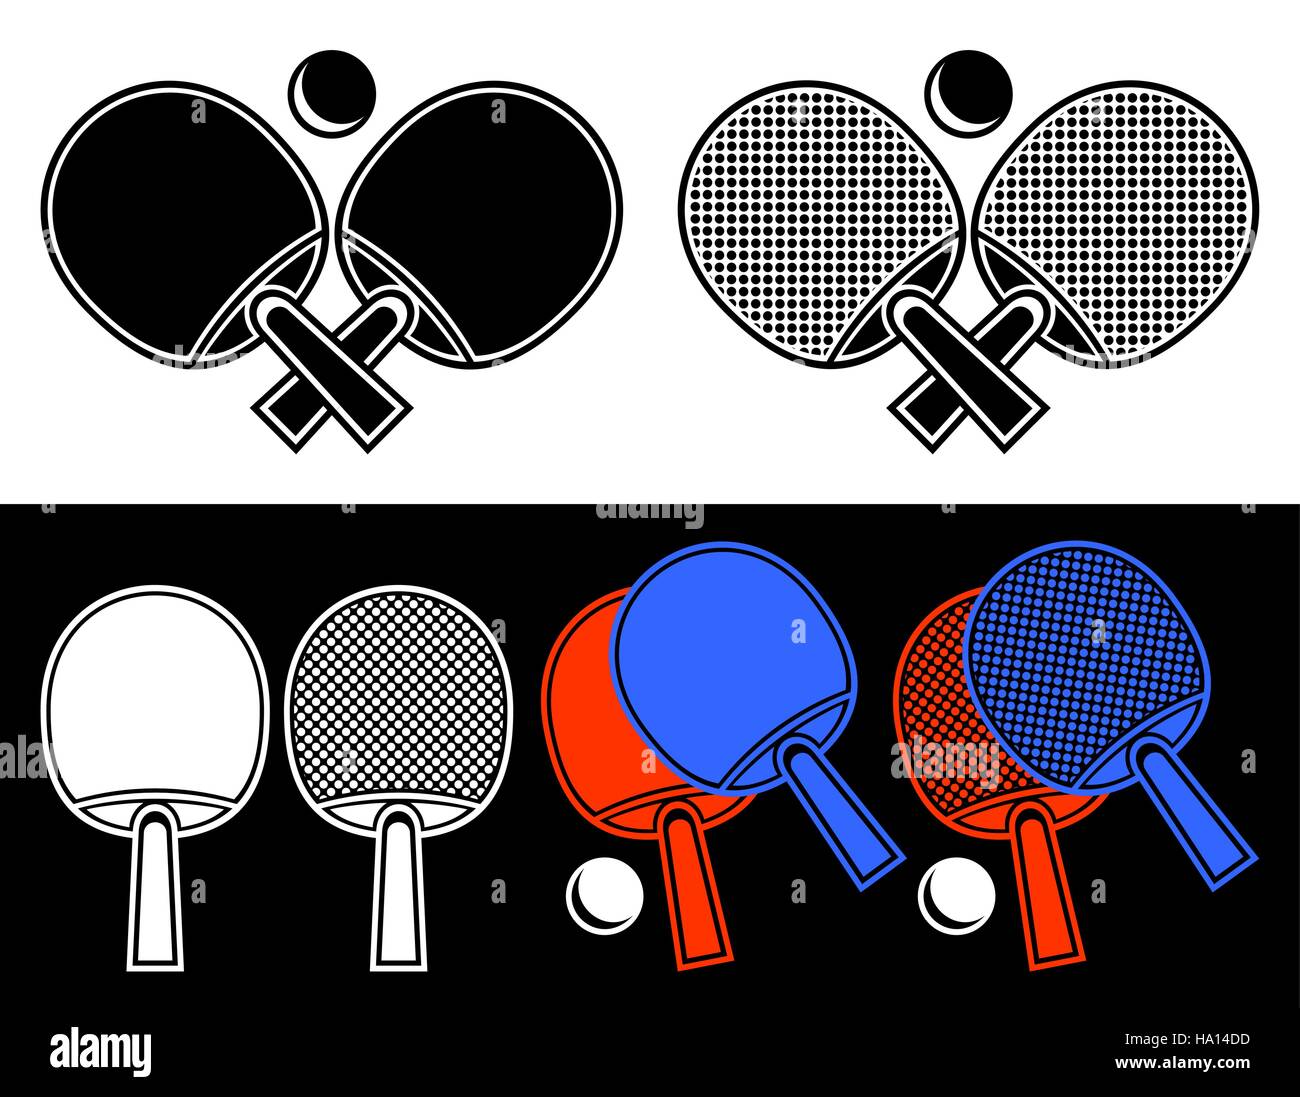 Rackets for table tennis. Stock Vector